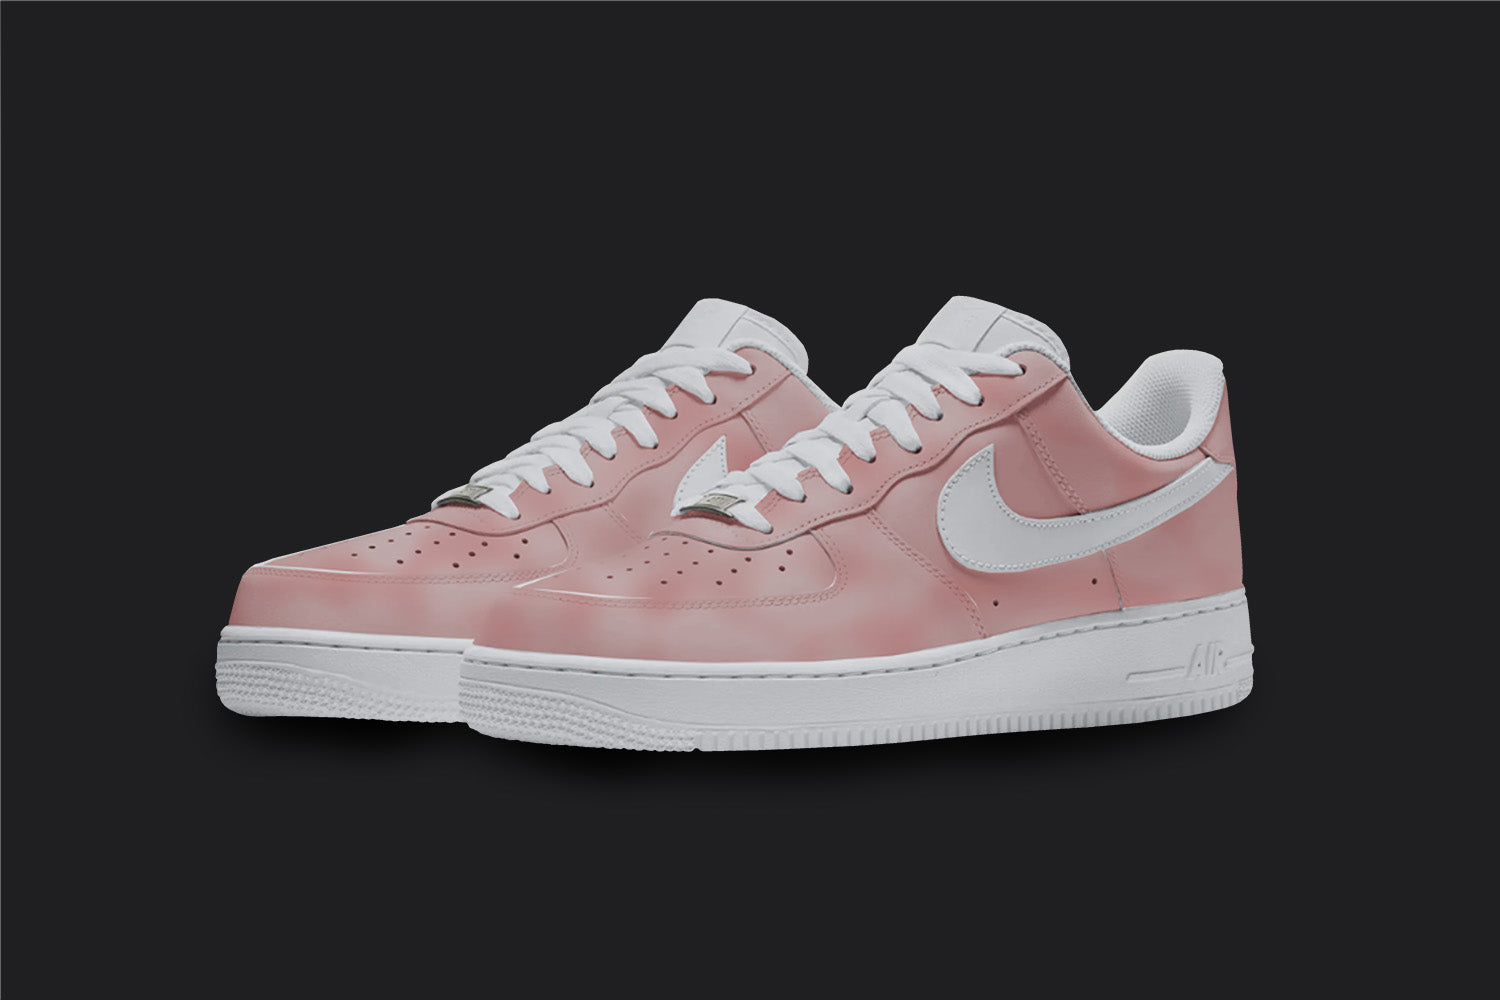 The image is of a Custom Nike Air force 1 sneaker pair on a blank black background. The white custom sneakers have a darker and lighter pink cloud pattern covering the sneakers.